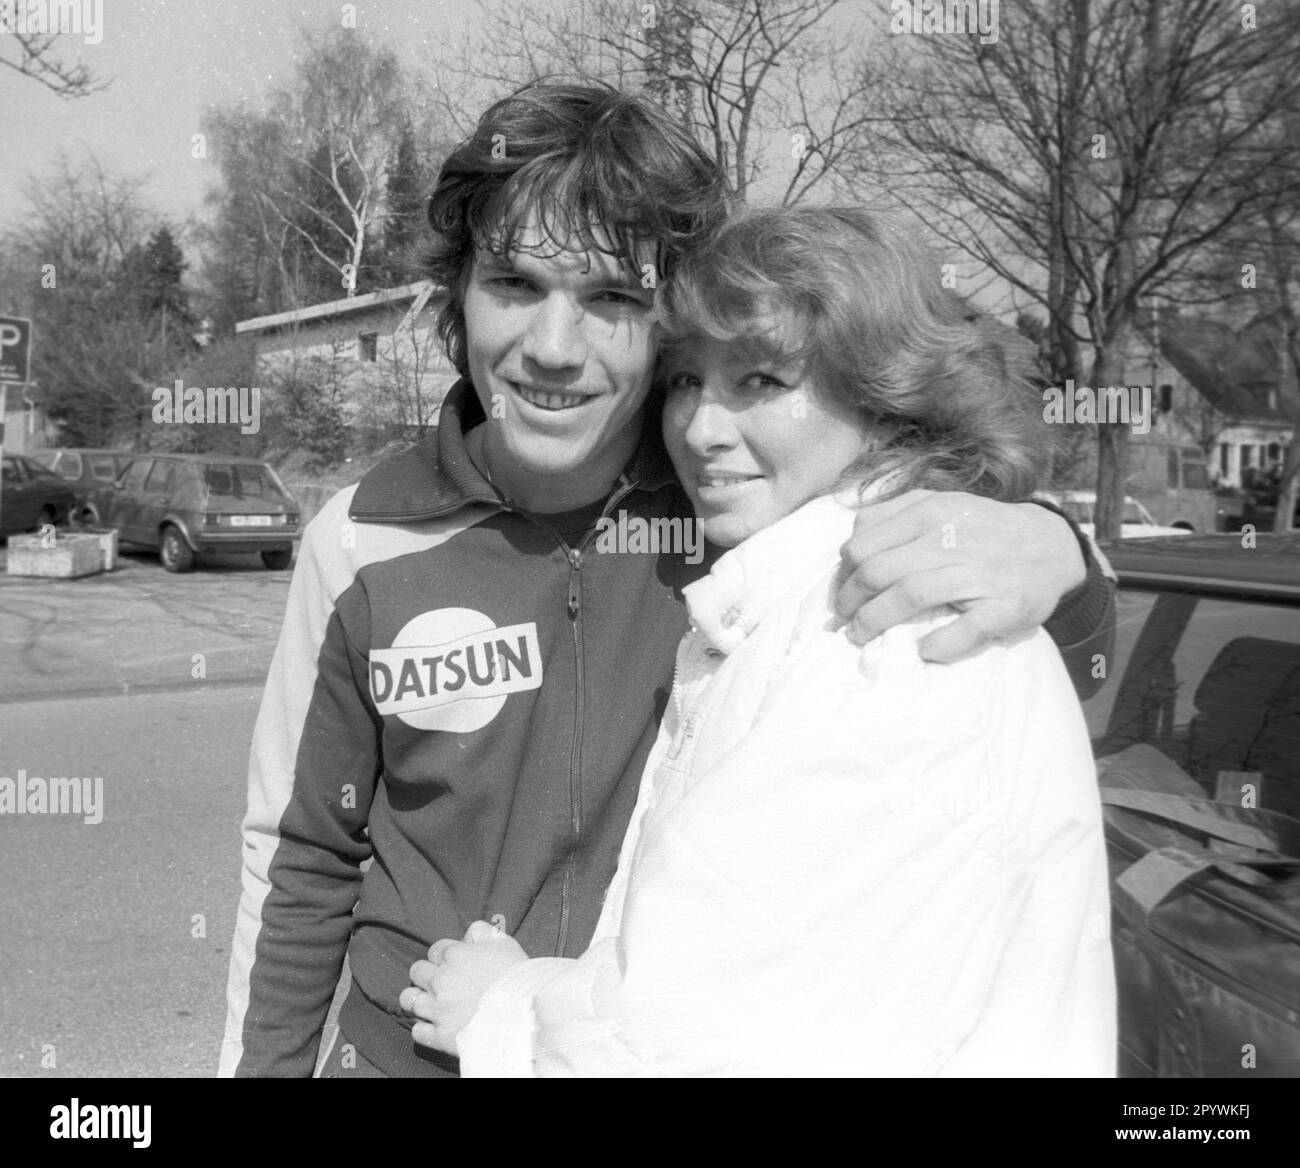 Lothar Matthäus (Borussia Mönchengladbach) with wife Silvia 02.04.1982. Only for journalistic use! Only for editorial use! [automated translation] Stock Photo